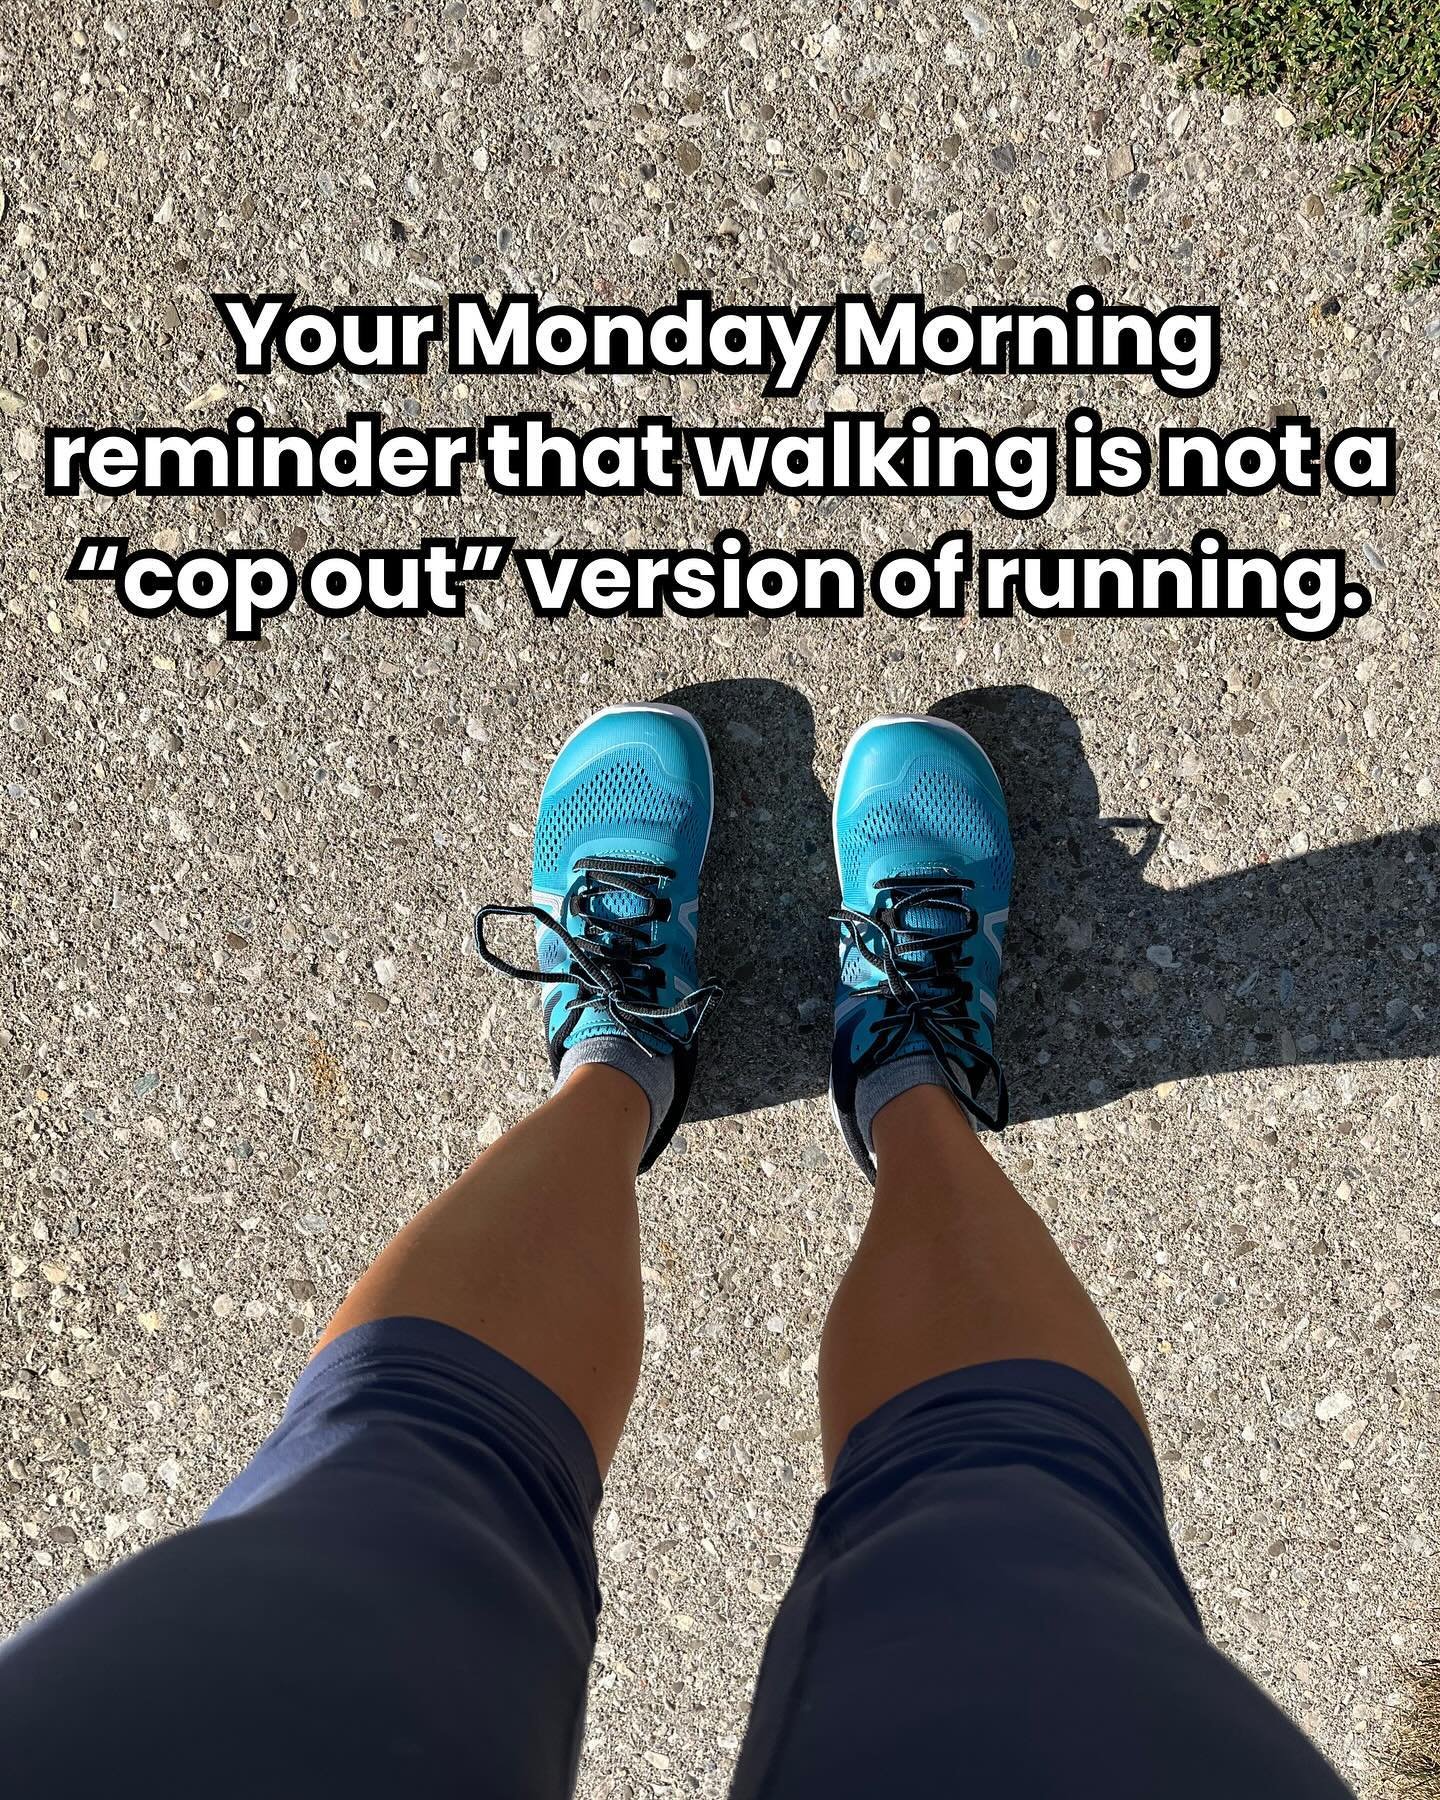 A reminder that leisurely walks count as exercise. 

(And no you don&rsquo;t need to track your calories, steps, time or distance walked for it to count). 

I used to think walking didn&rsquo;t &ldquo;count&rdquo; because it wasn&rsquo;t intense enou